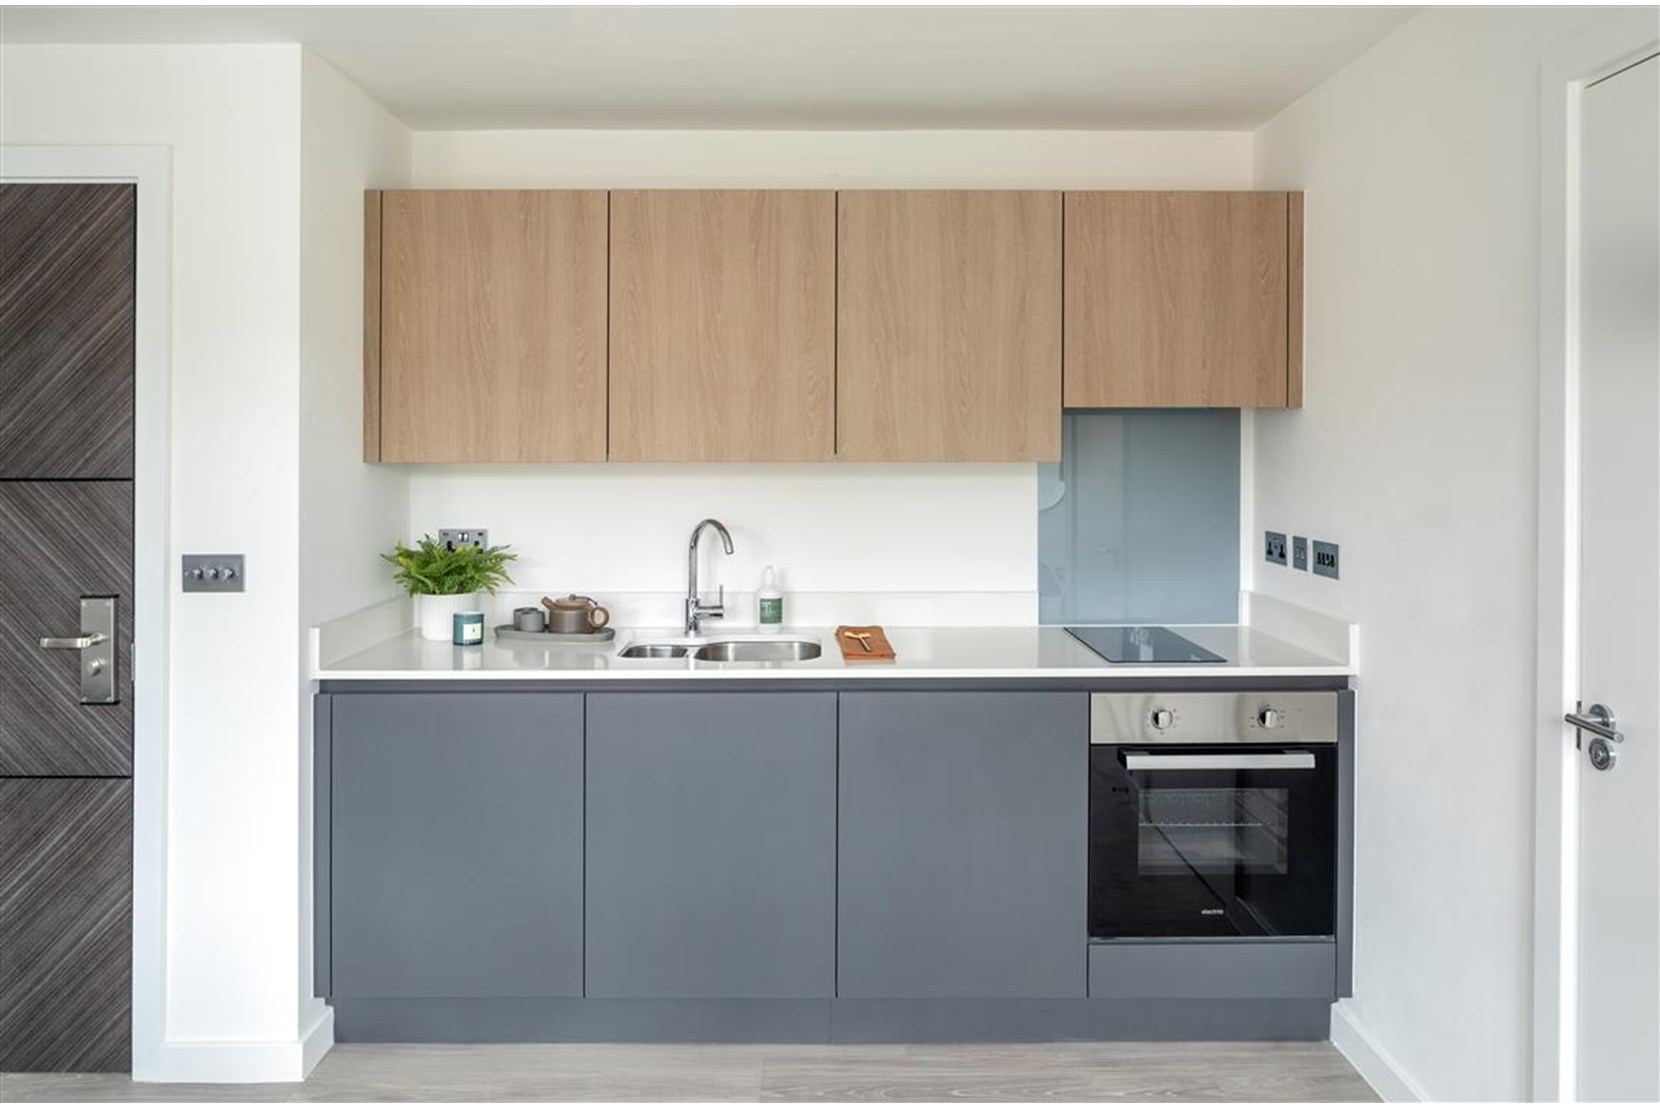 Apartments to Rent by JLL at Stratford Studios, Newham, E15, kitchen